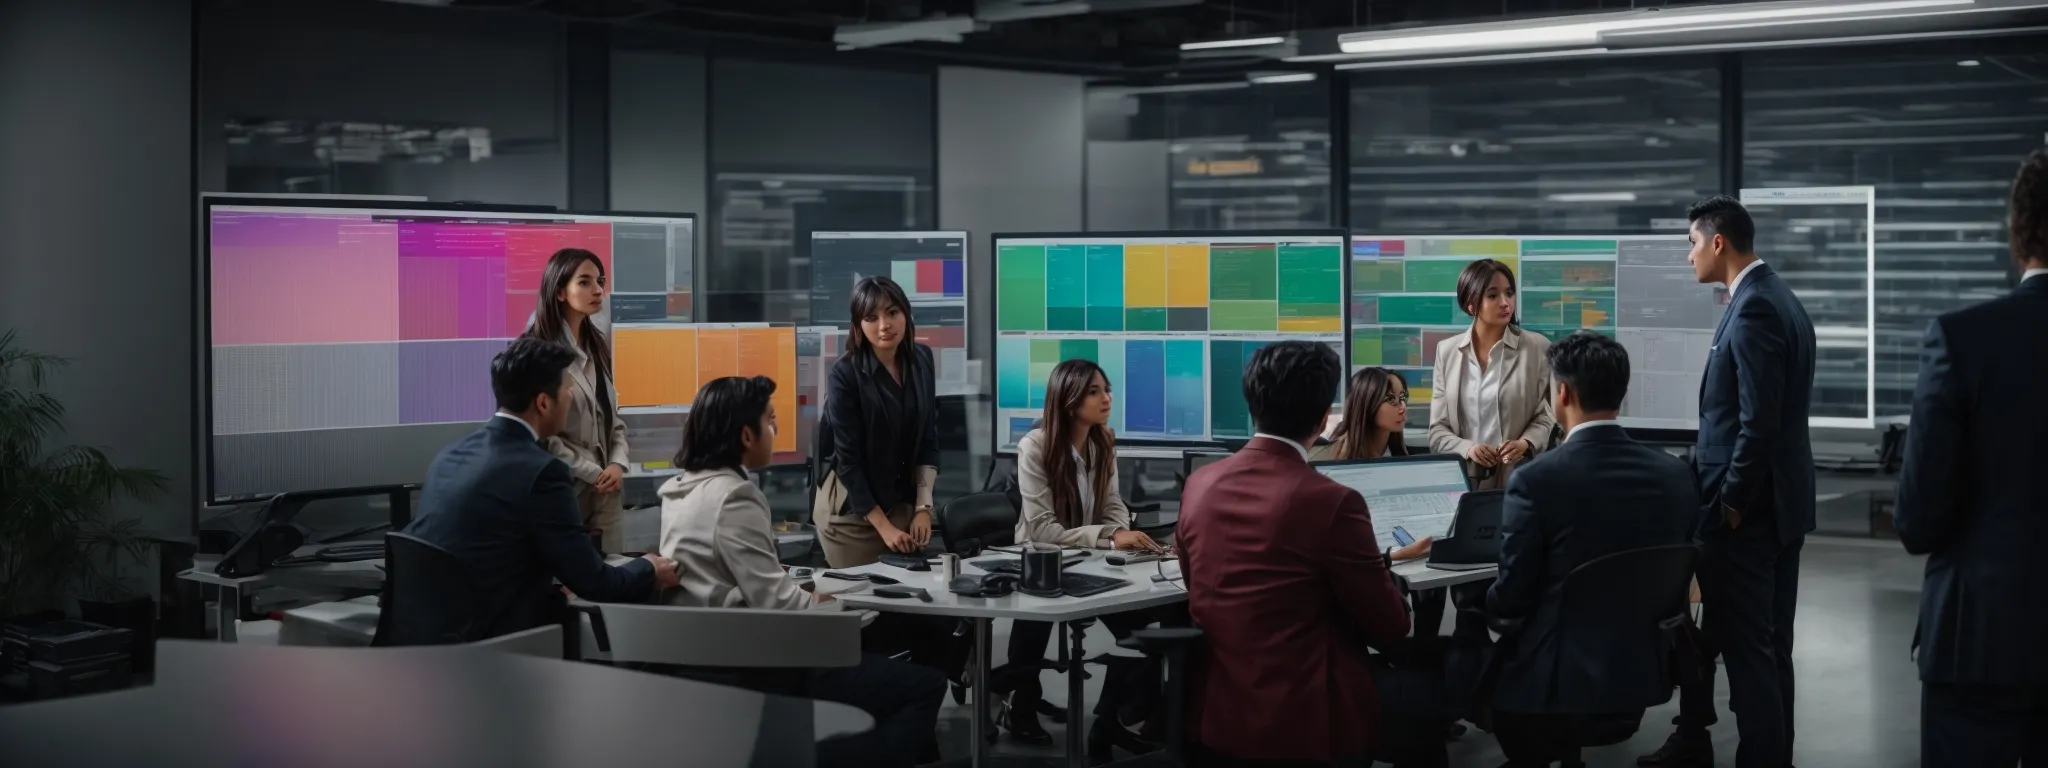 a group of professionals gathered around a large monitor, closely analyzing and discussing a colorful comparison chart of workflow software features.